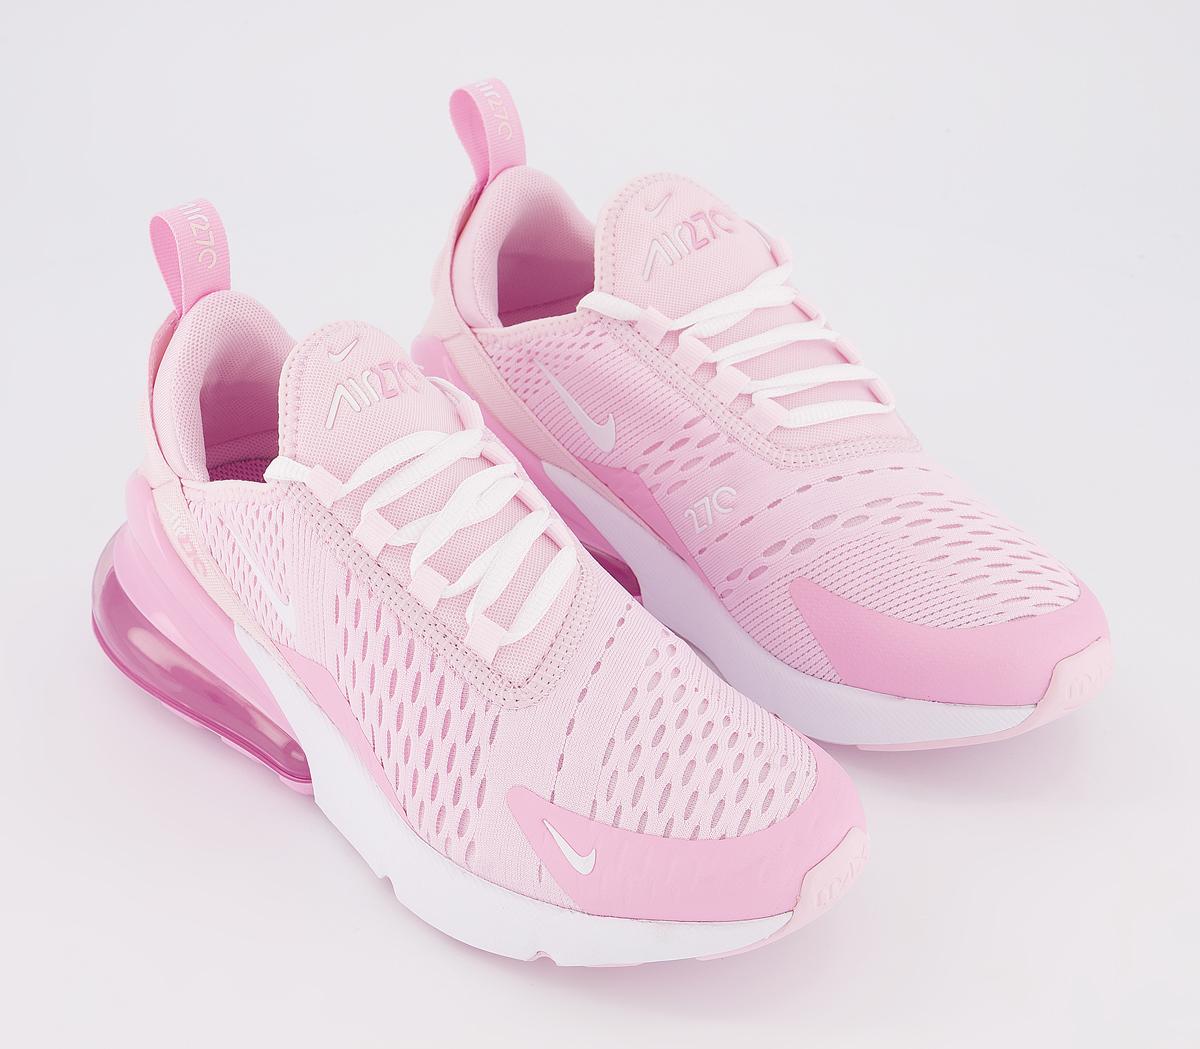 Nike Air Max 270 Gs Trainers Pink Foam White Pink Rise - Unisex